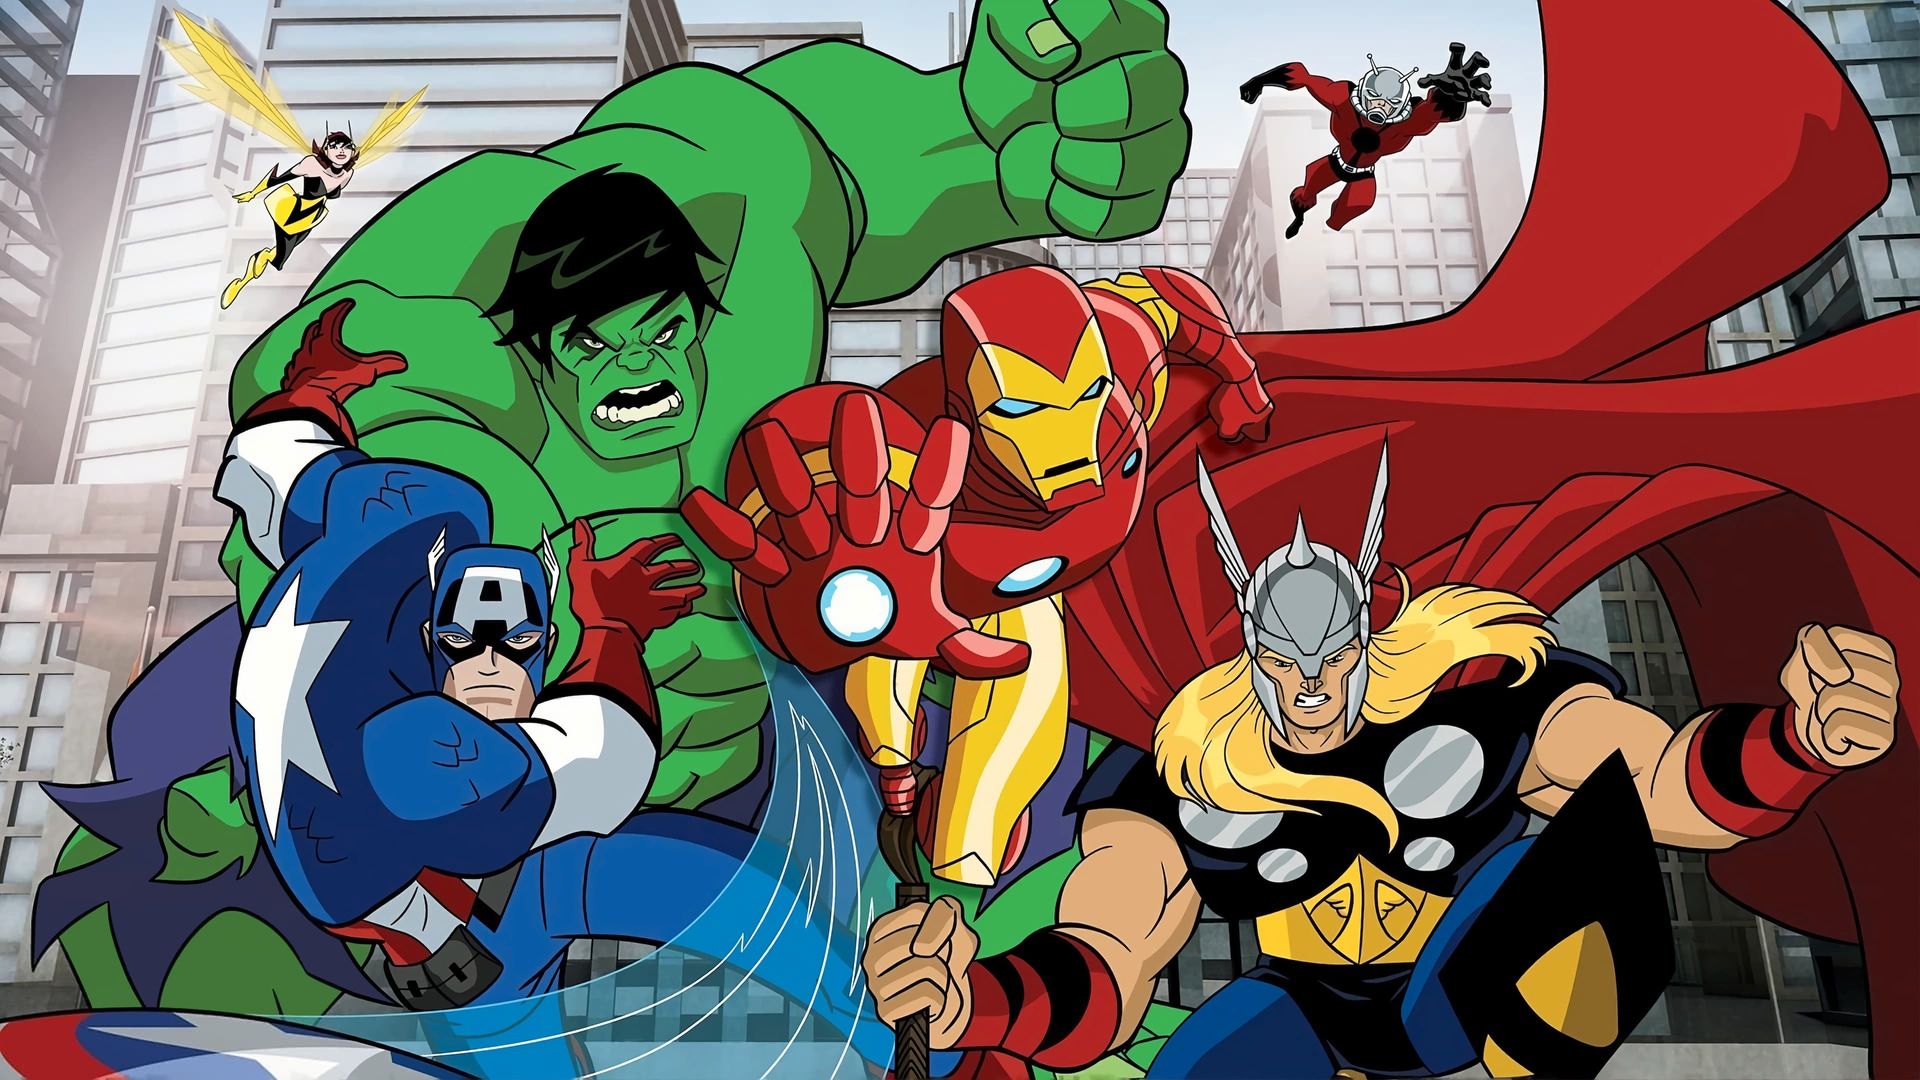 The Avengers: Earth's Mightiest Heroes Backdrop